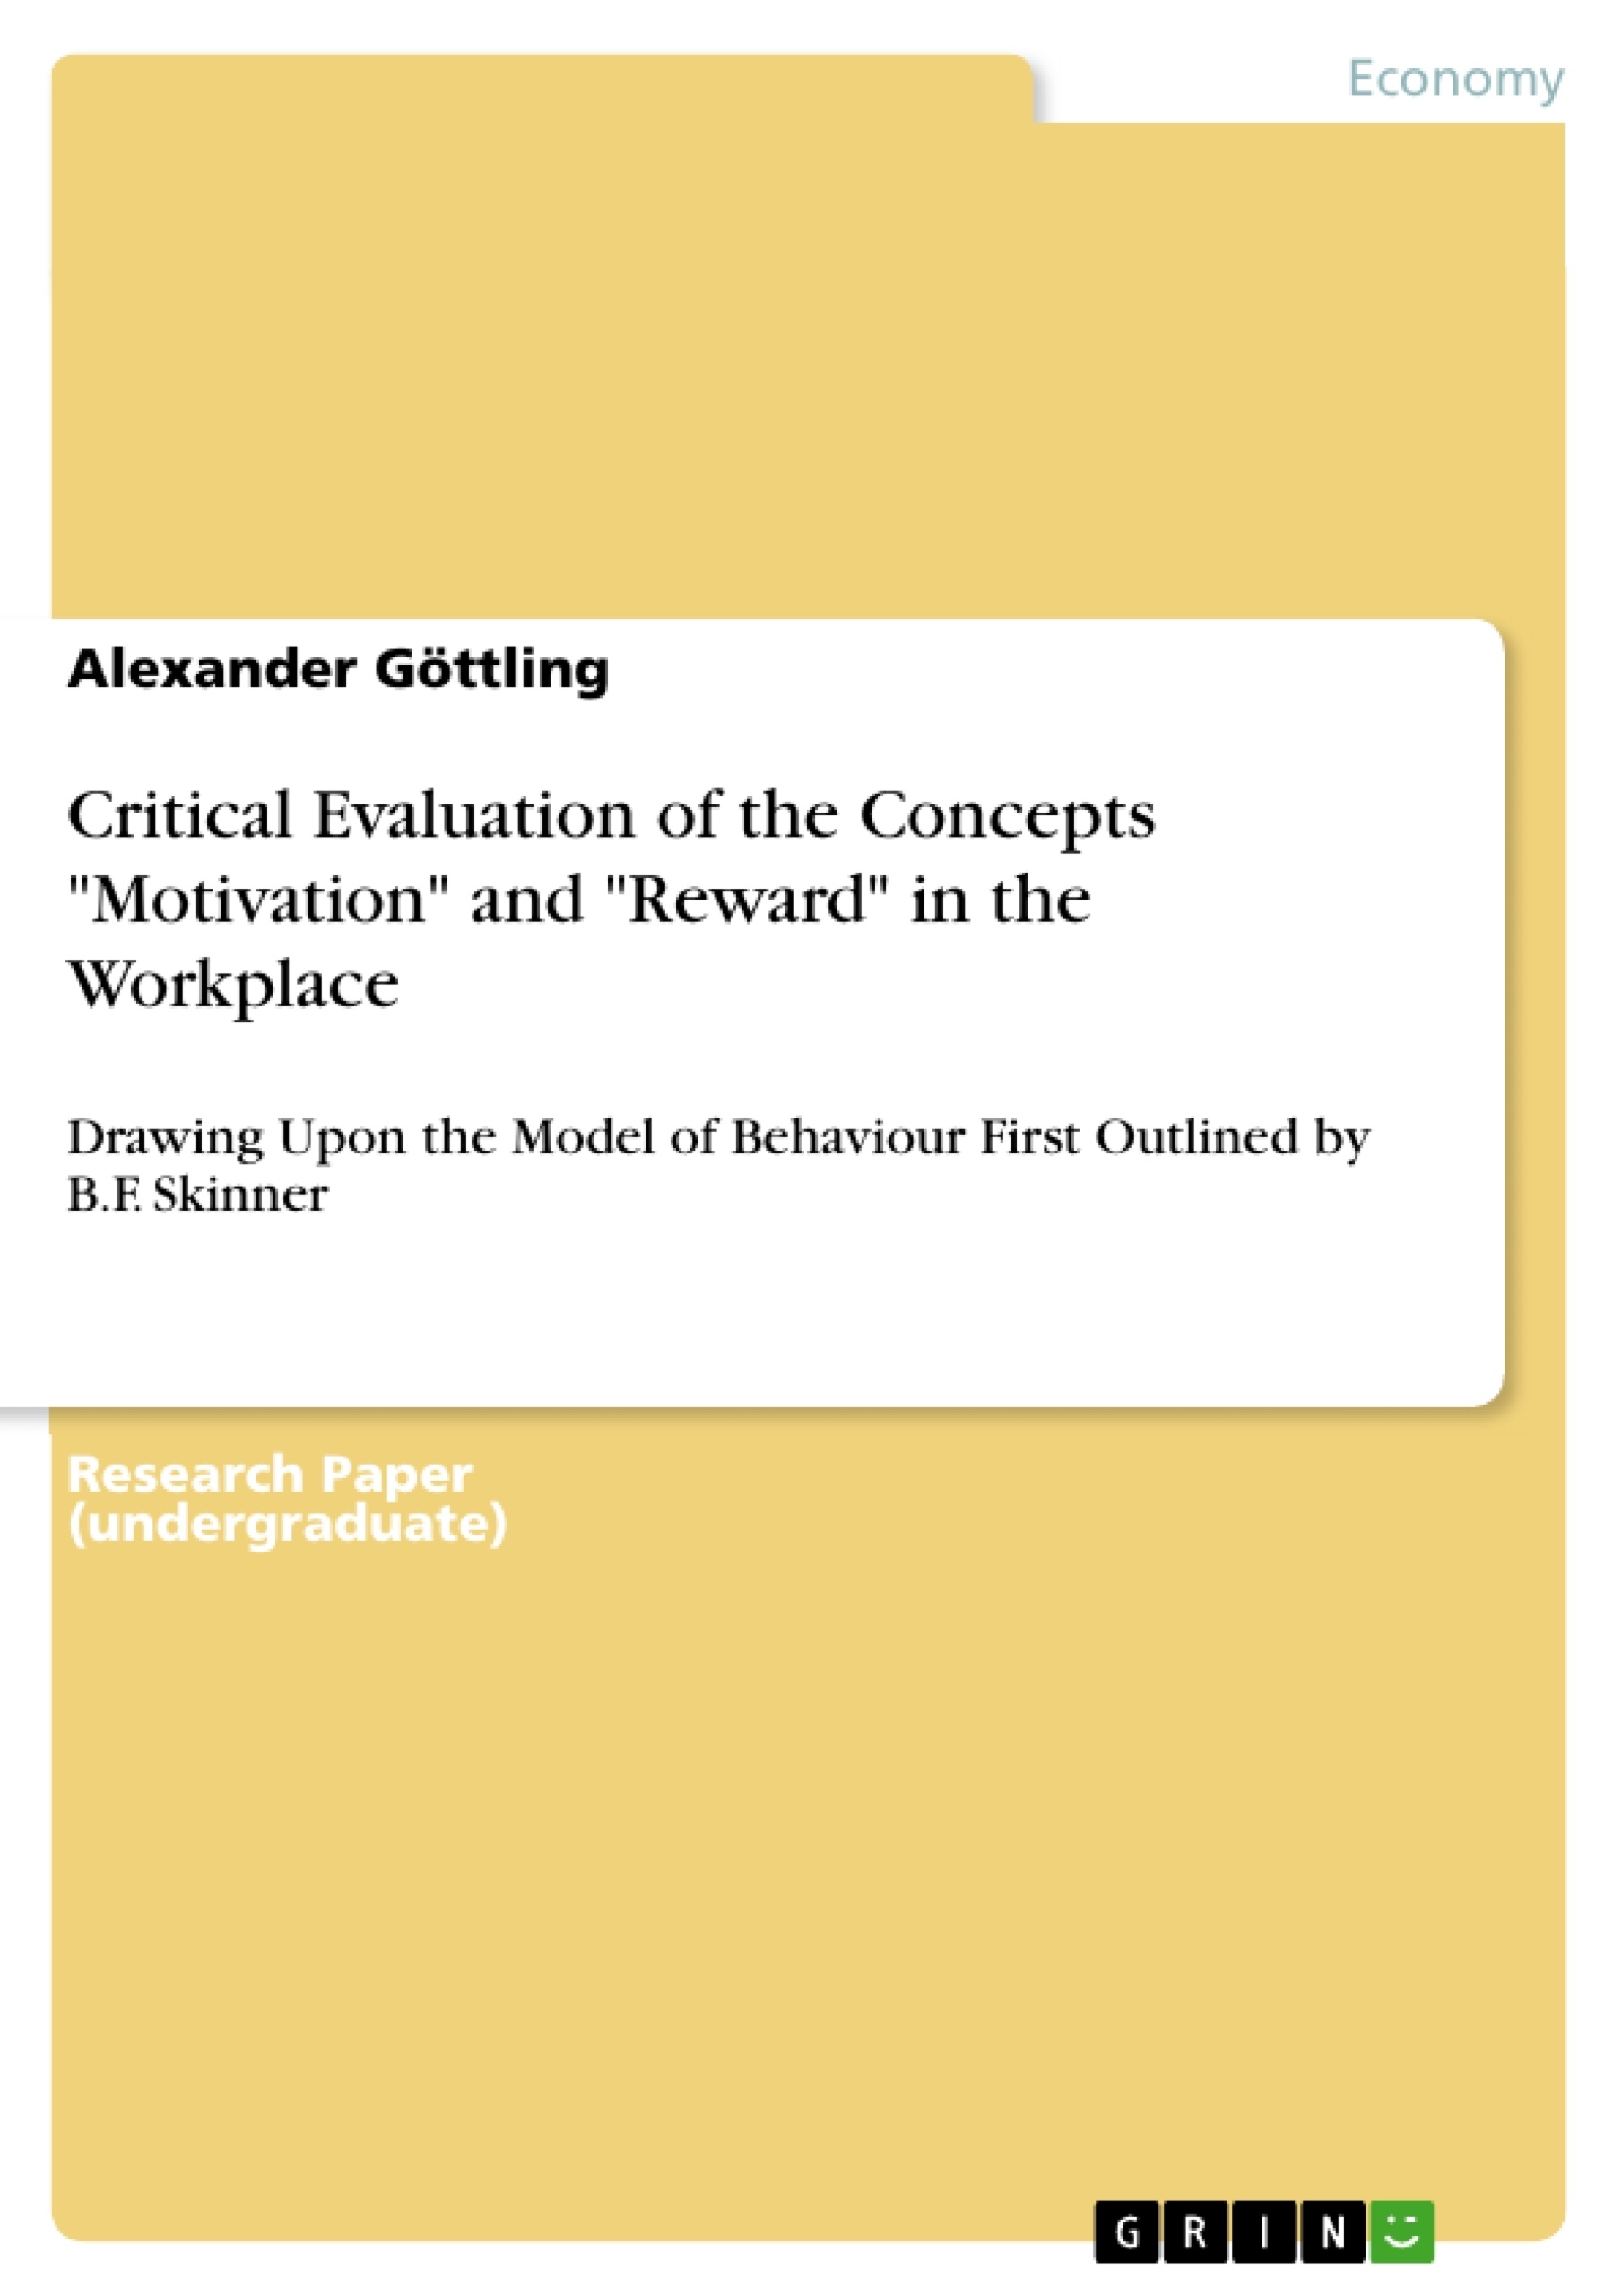 Title: Critical Evaluation of the Concepts "Motivation" and "Reward" in the Workplace